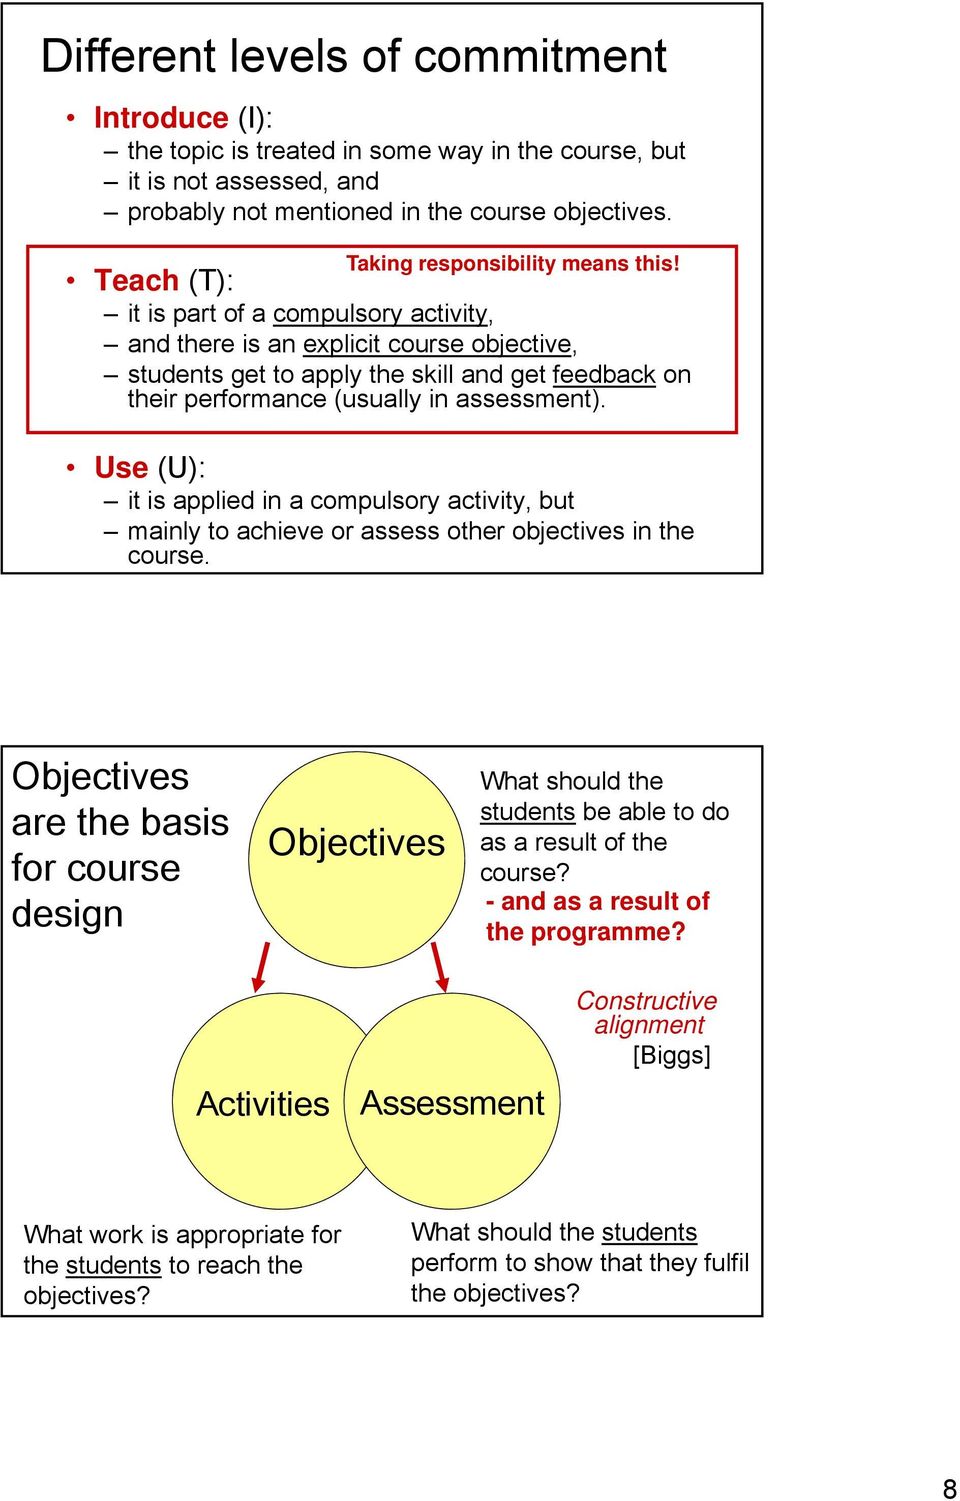 Teach (T): it is part of a compulsory activity, and there is an explicit course objective, students get to apply ppy the skill and get feedback on their performance (usually in assessment).